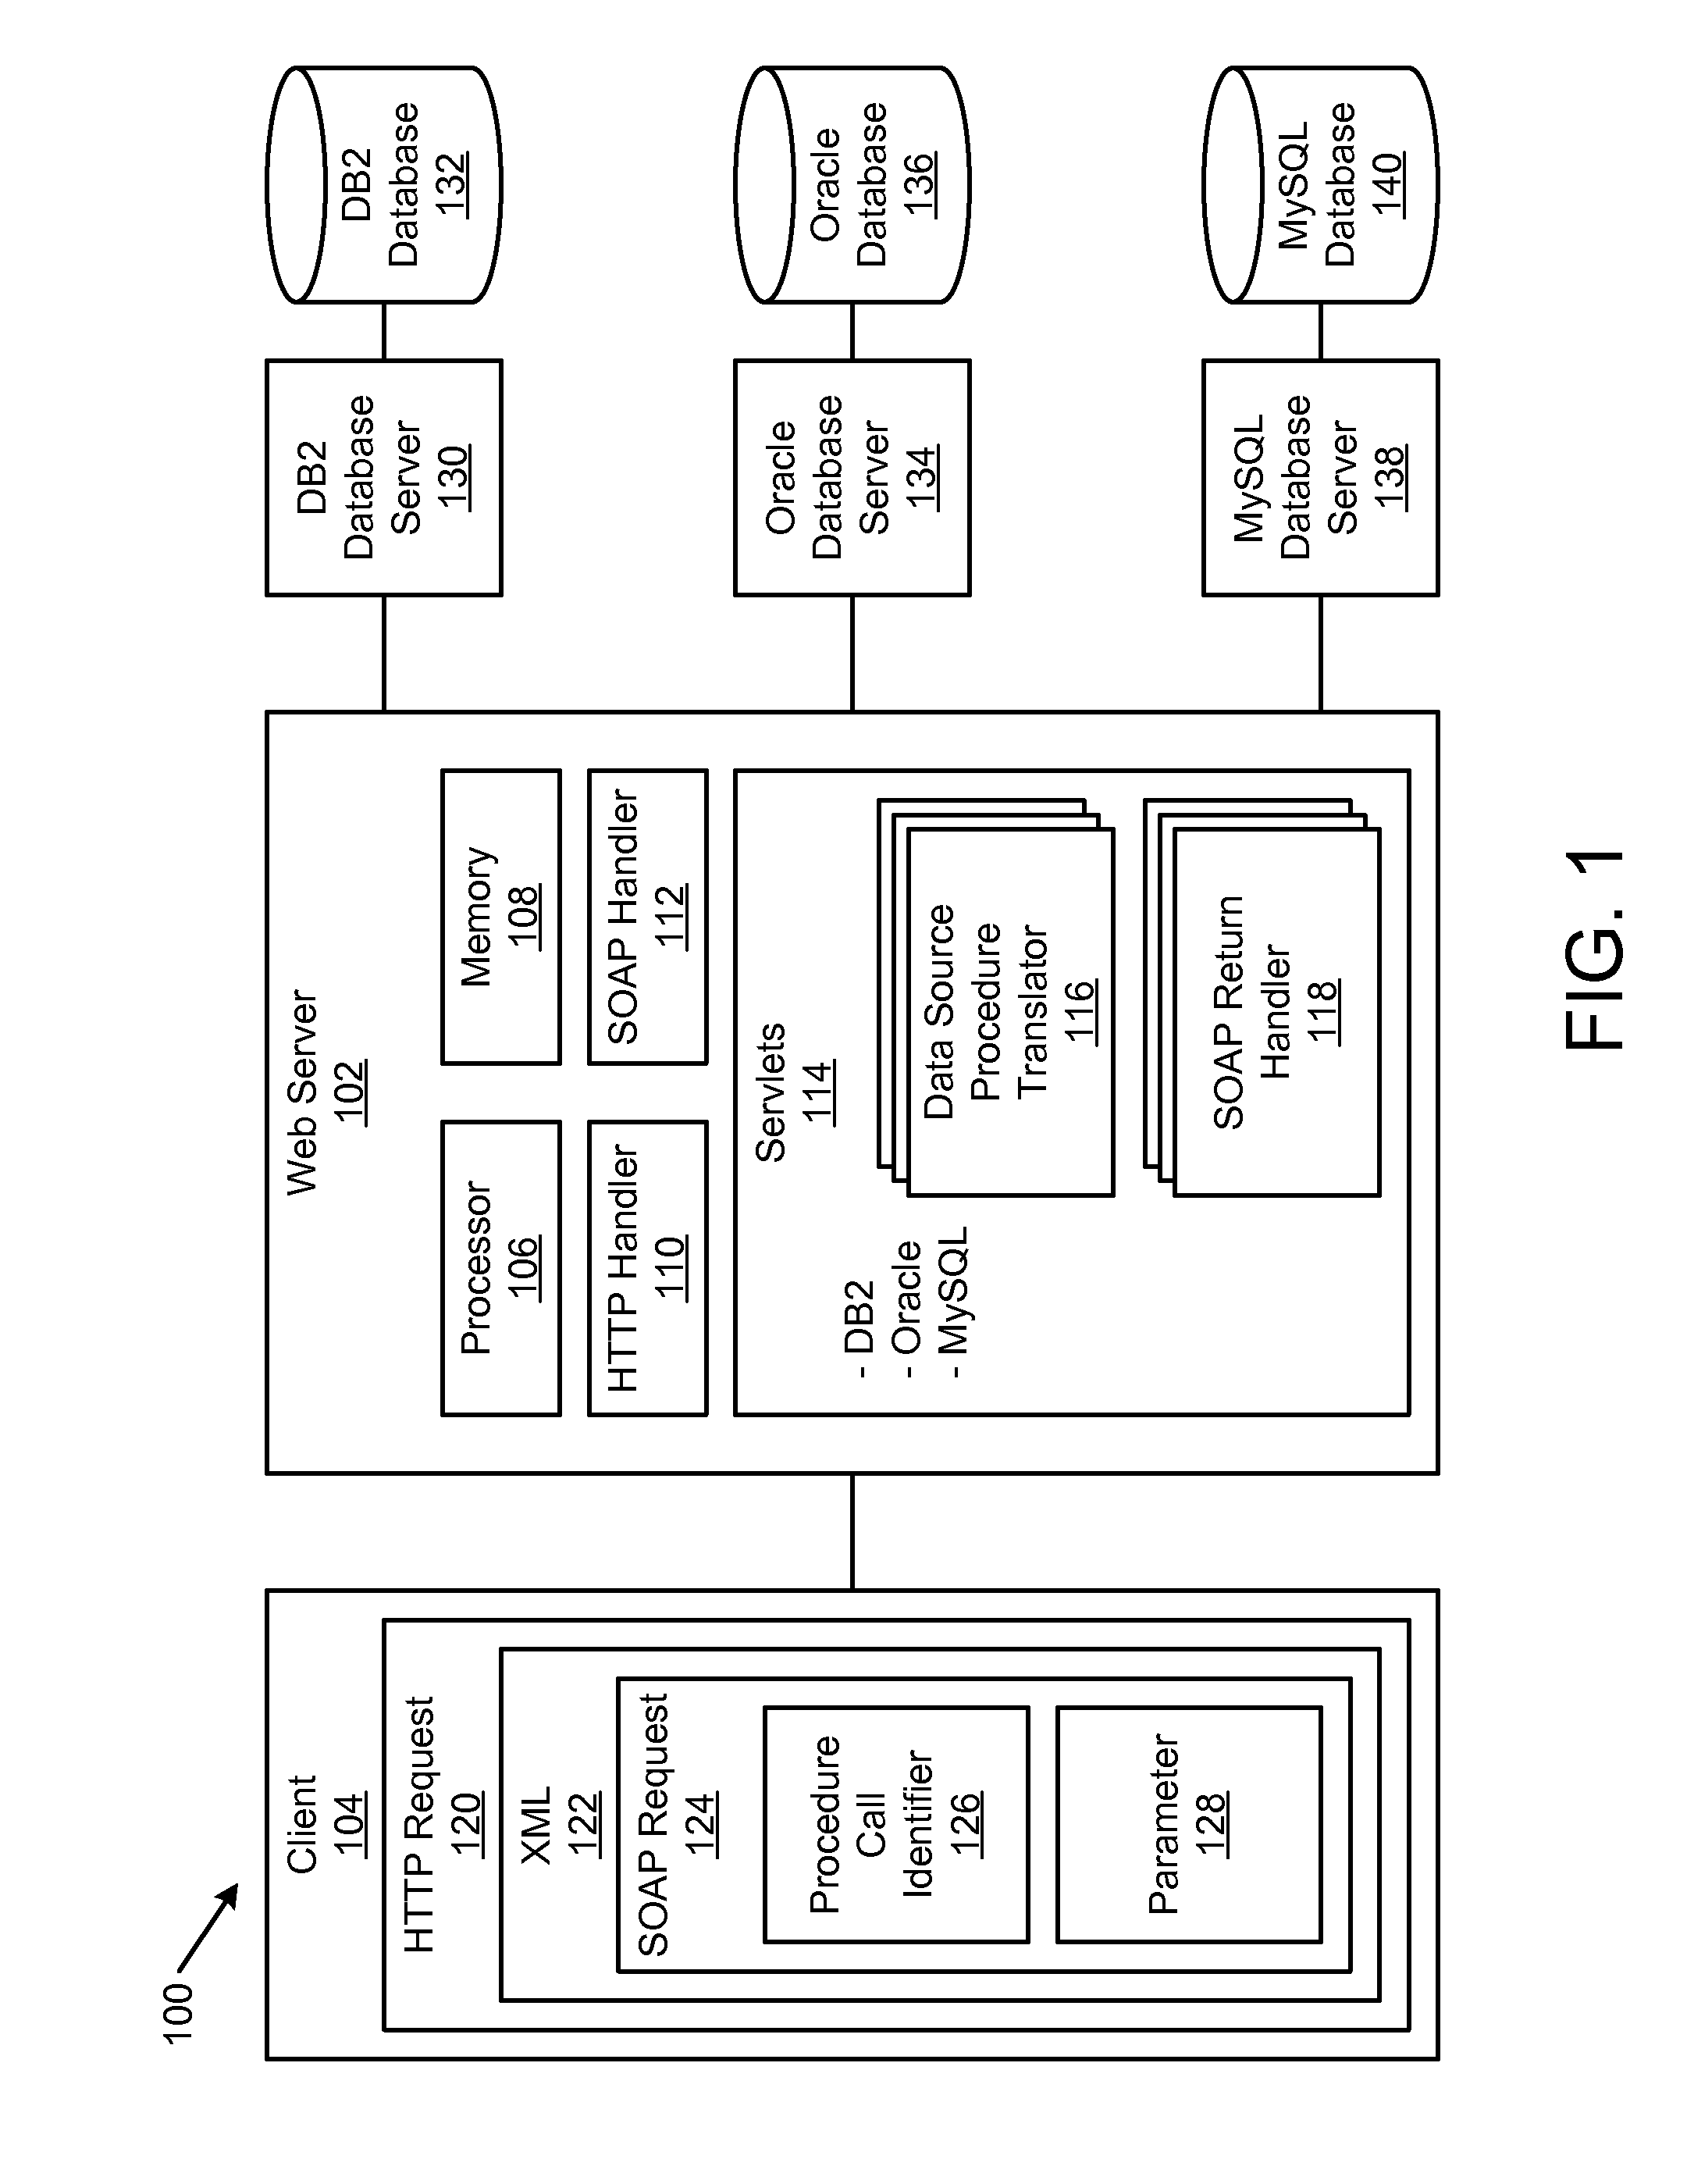 Apparatus, system, and method for soap access to data source procedures